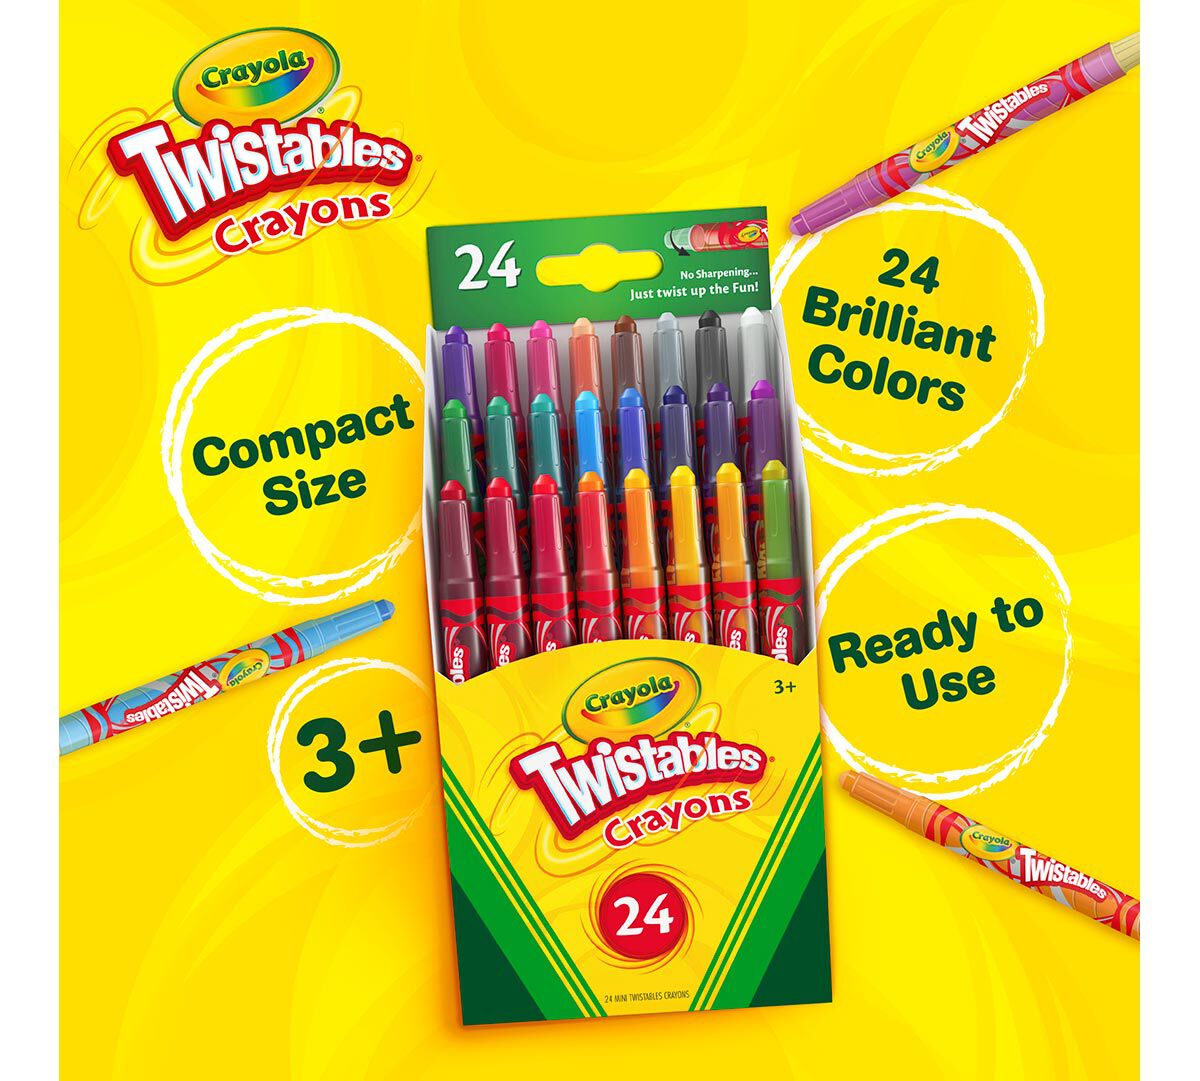 Crayola Twistables Crayons Multicolour Pack of 24 for sale online 